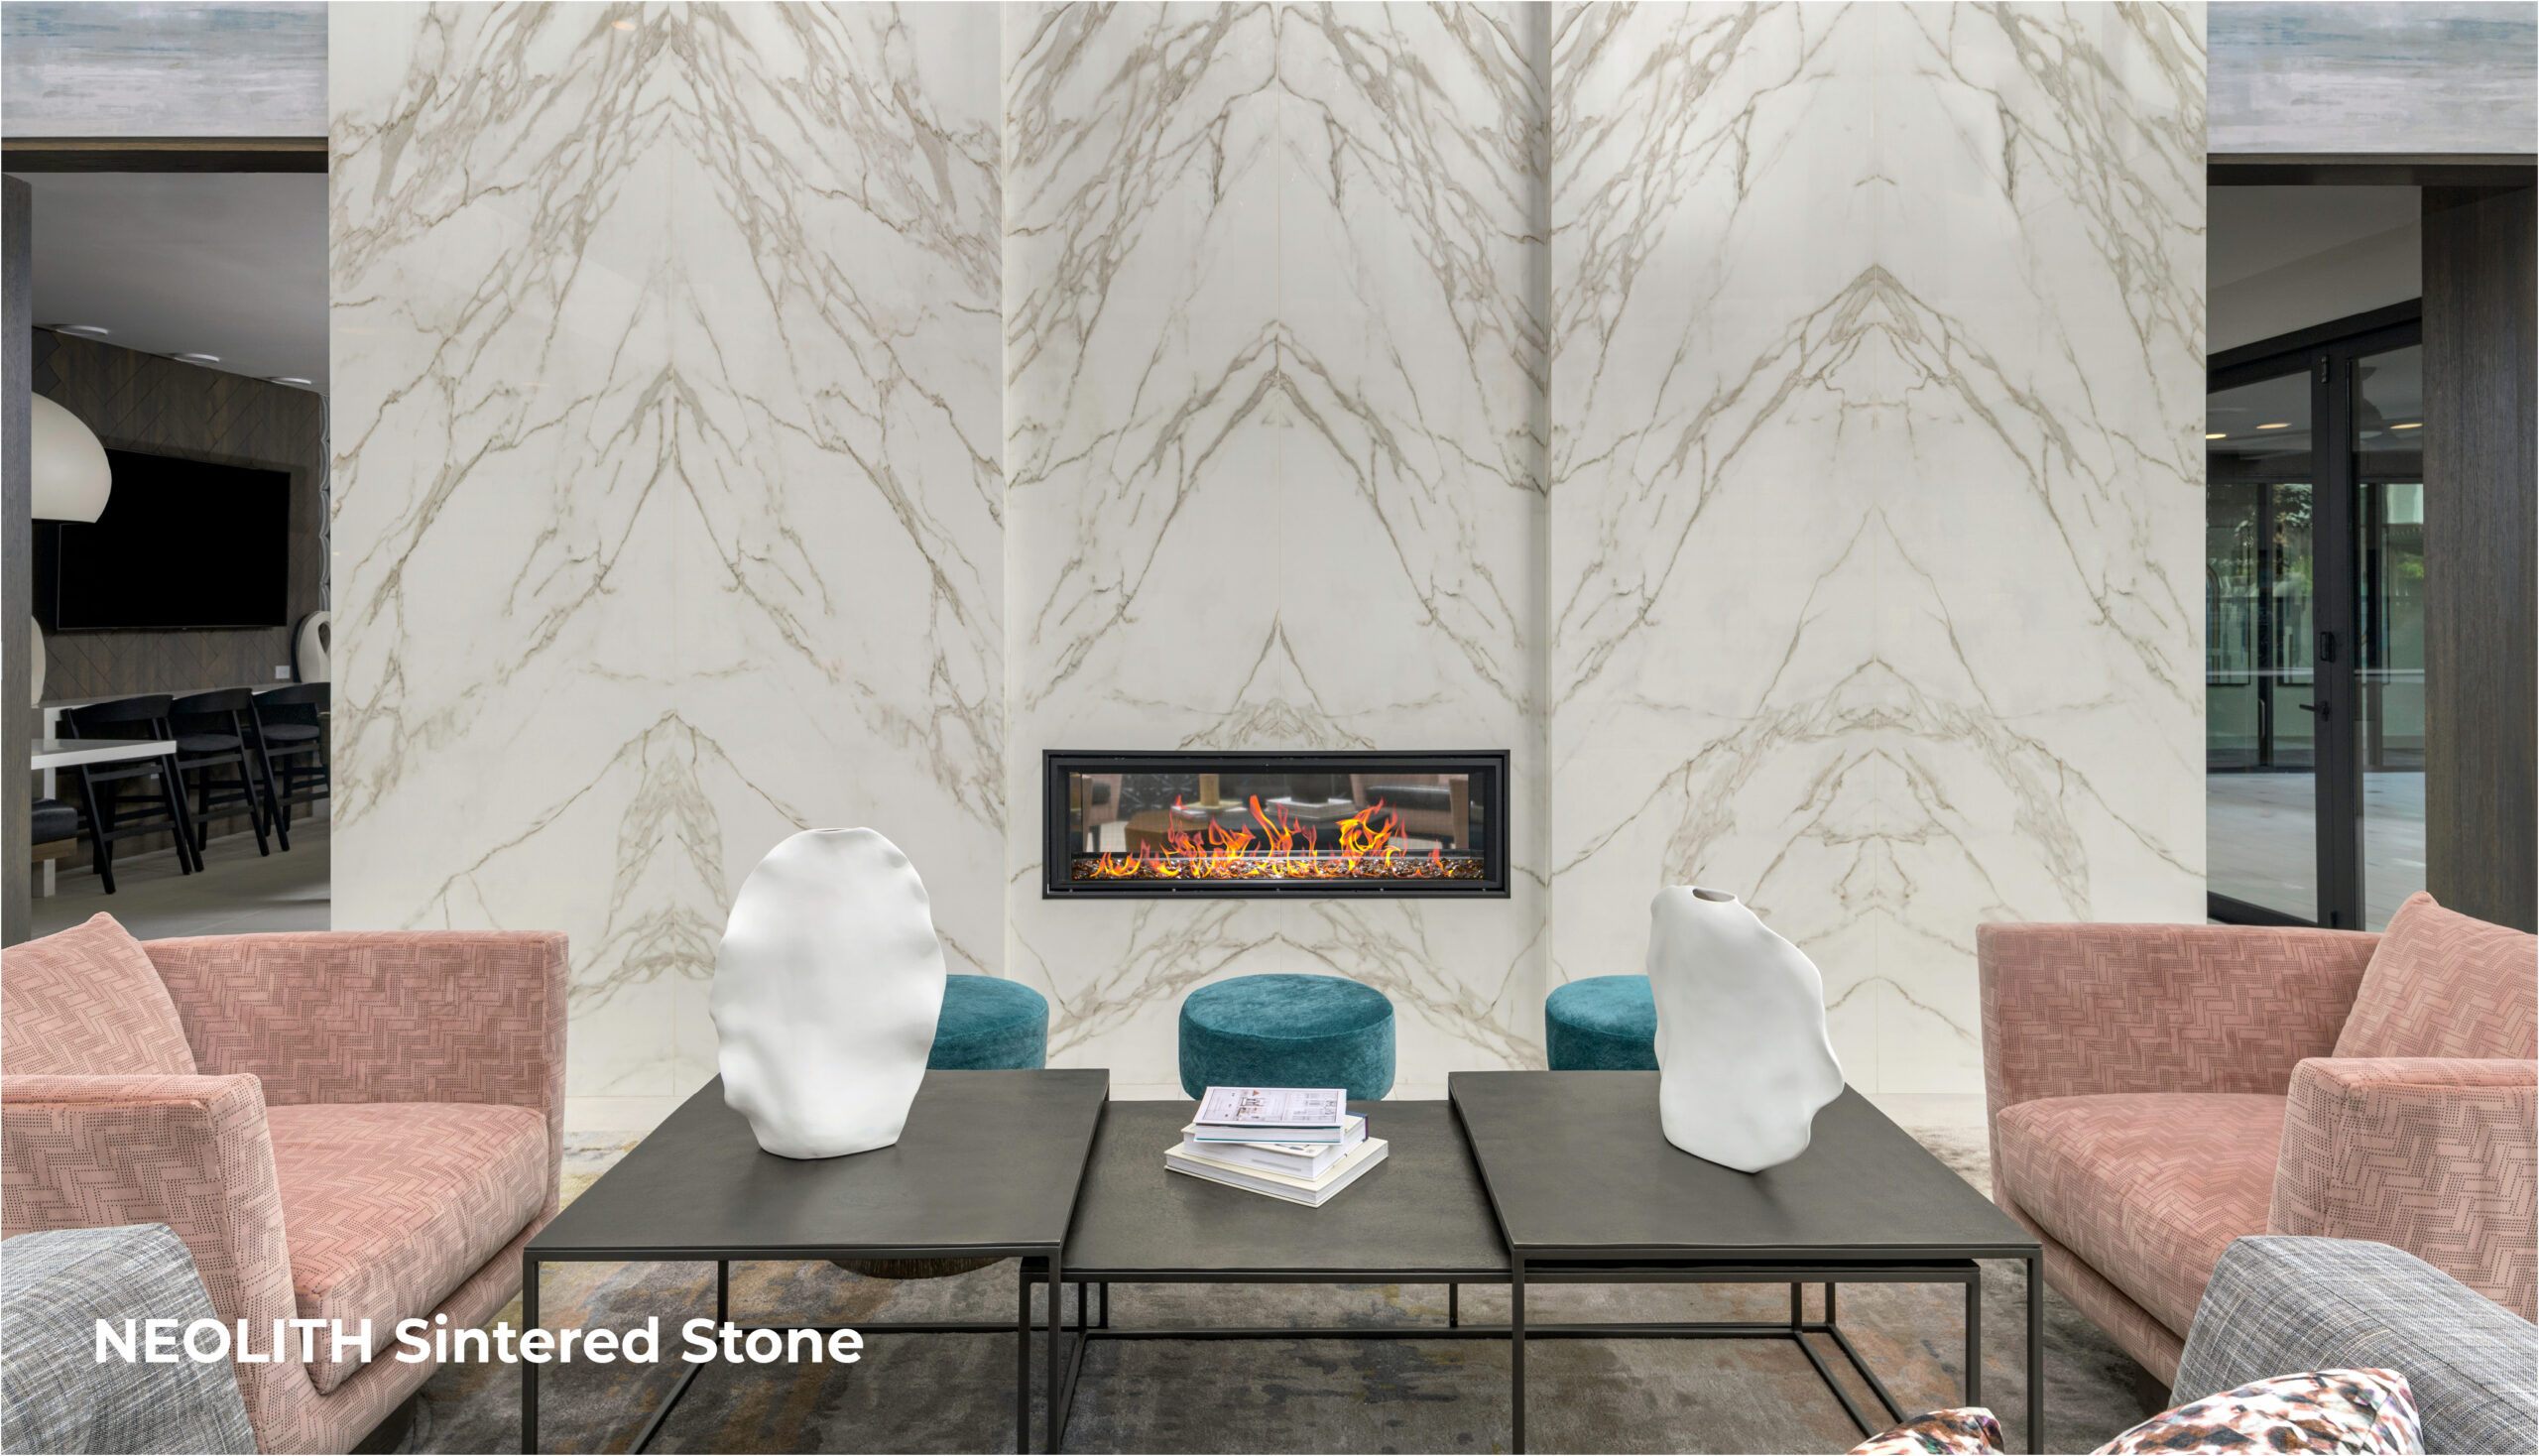 Neolith Sintered Stone